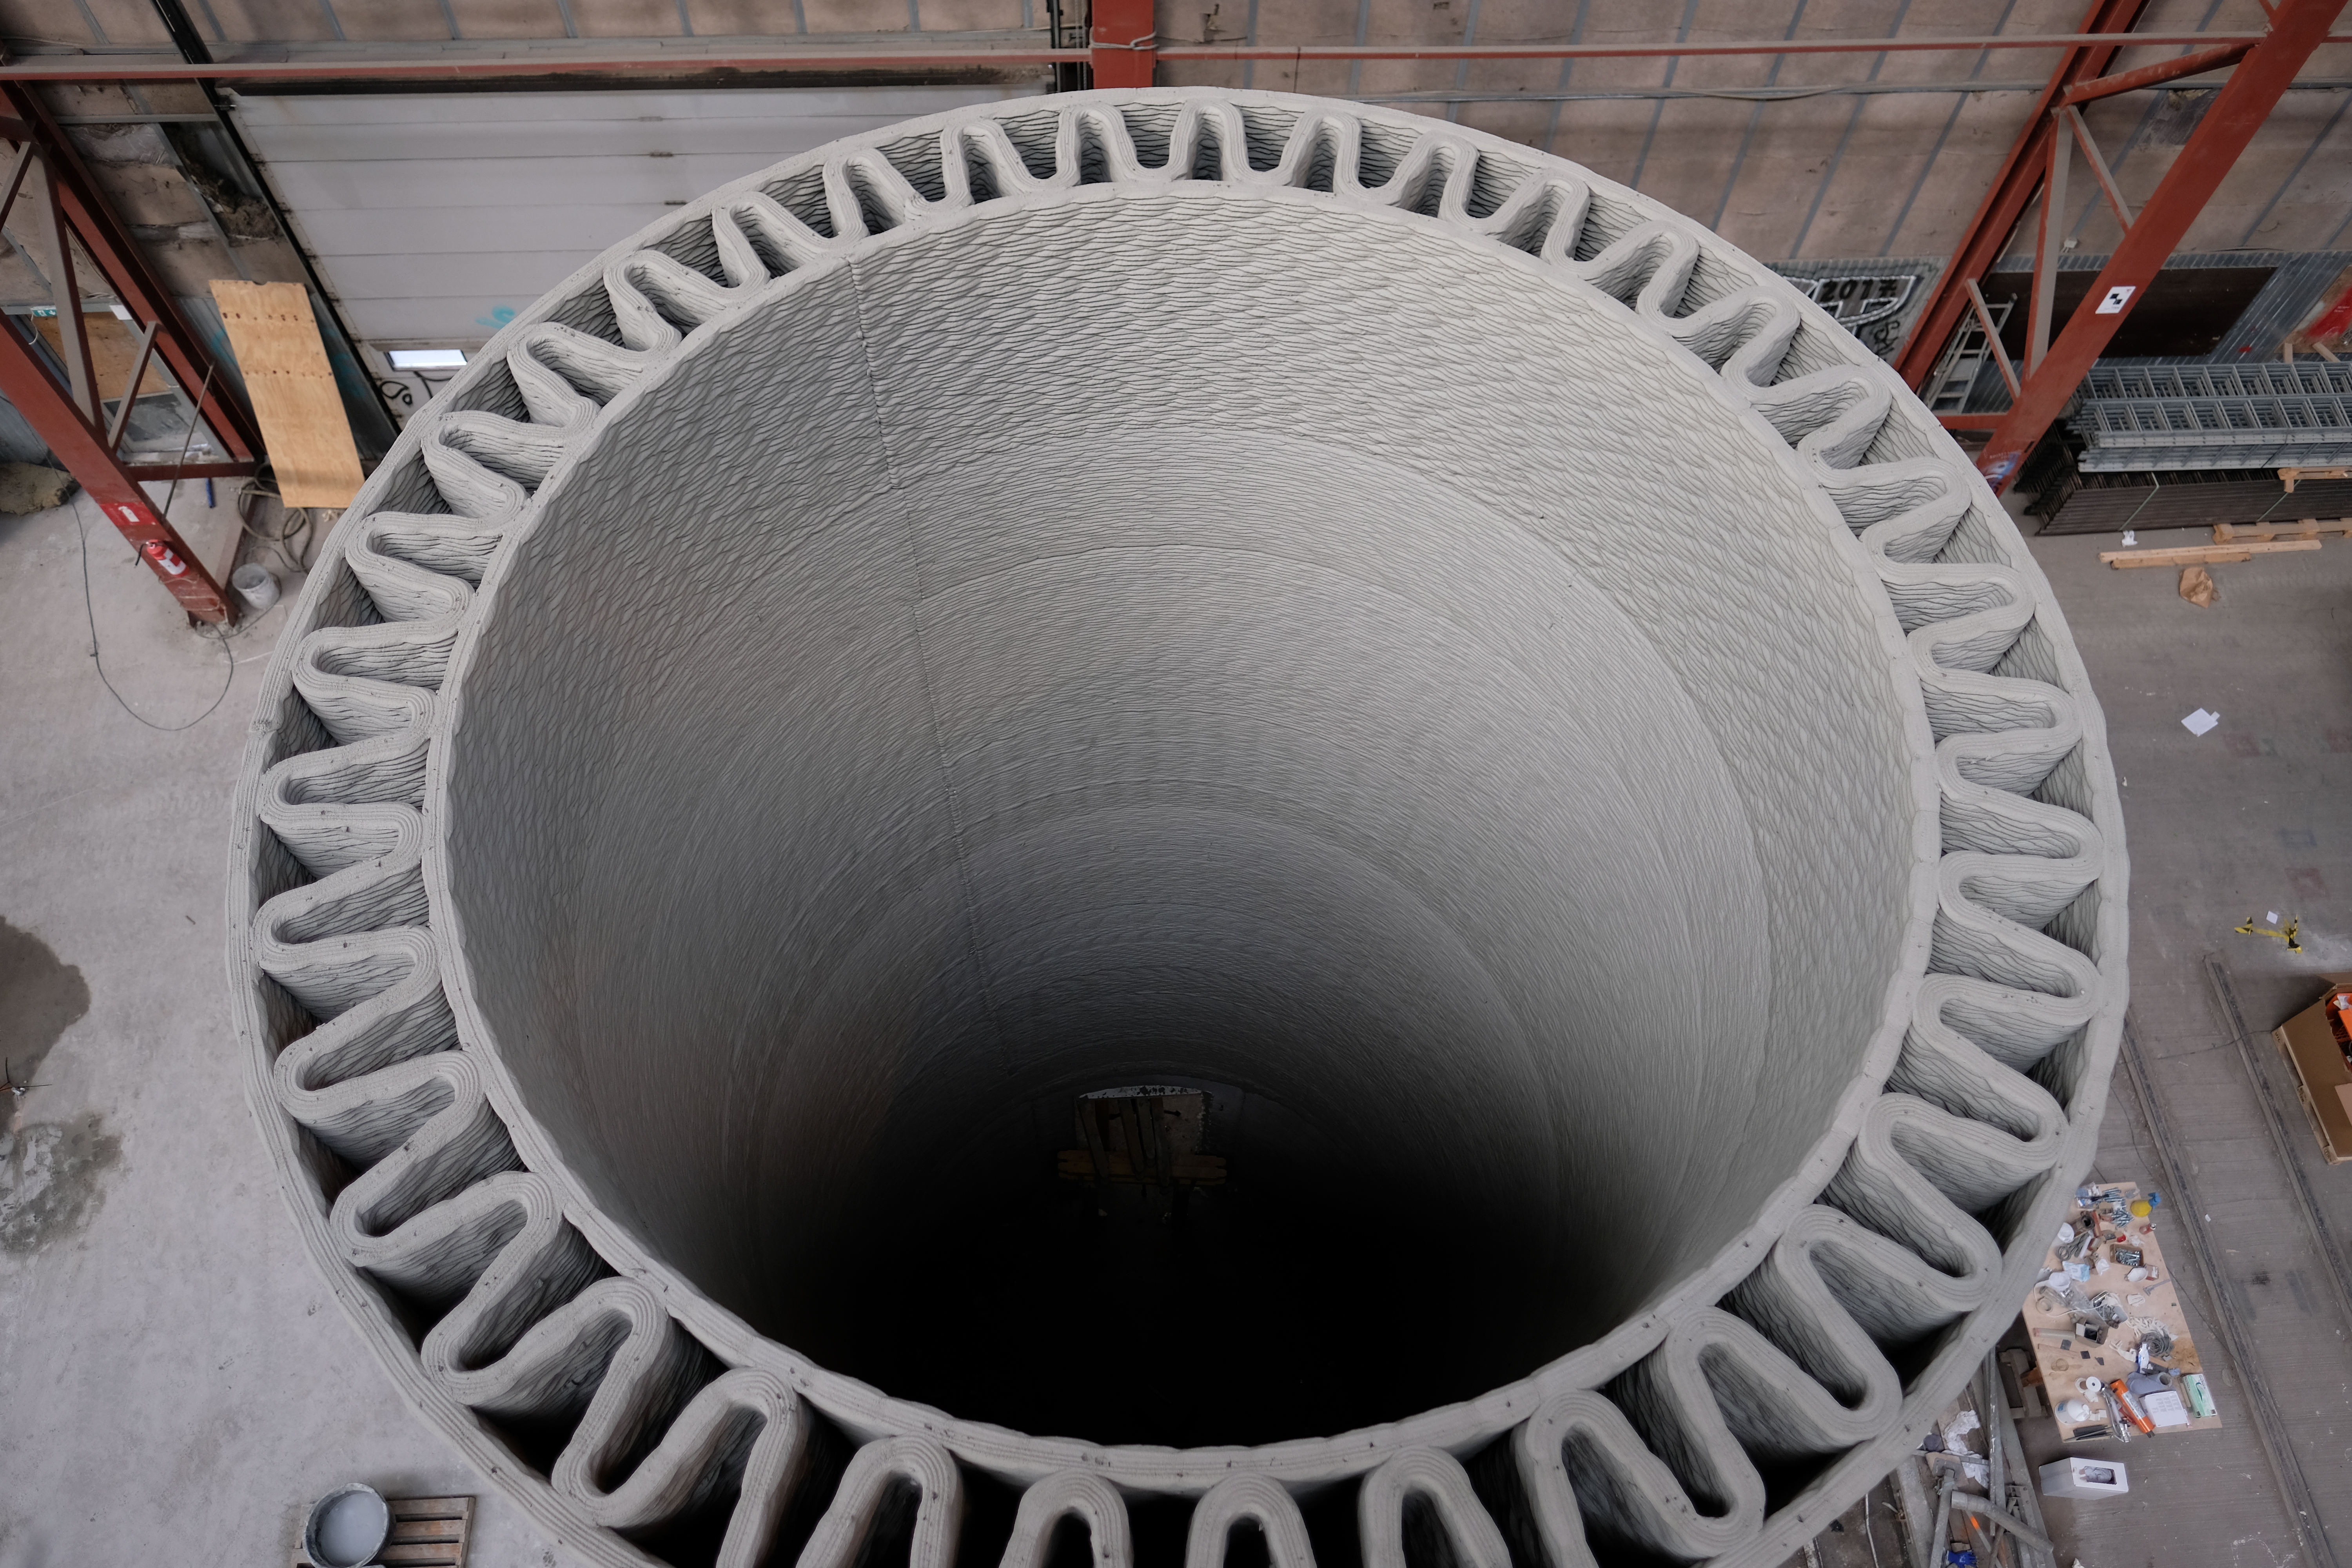 The partners have already 3D printed a 10m tall prototype pedestal. Photo via GE.